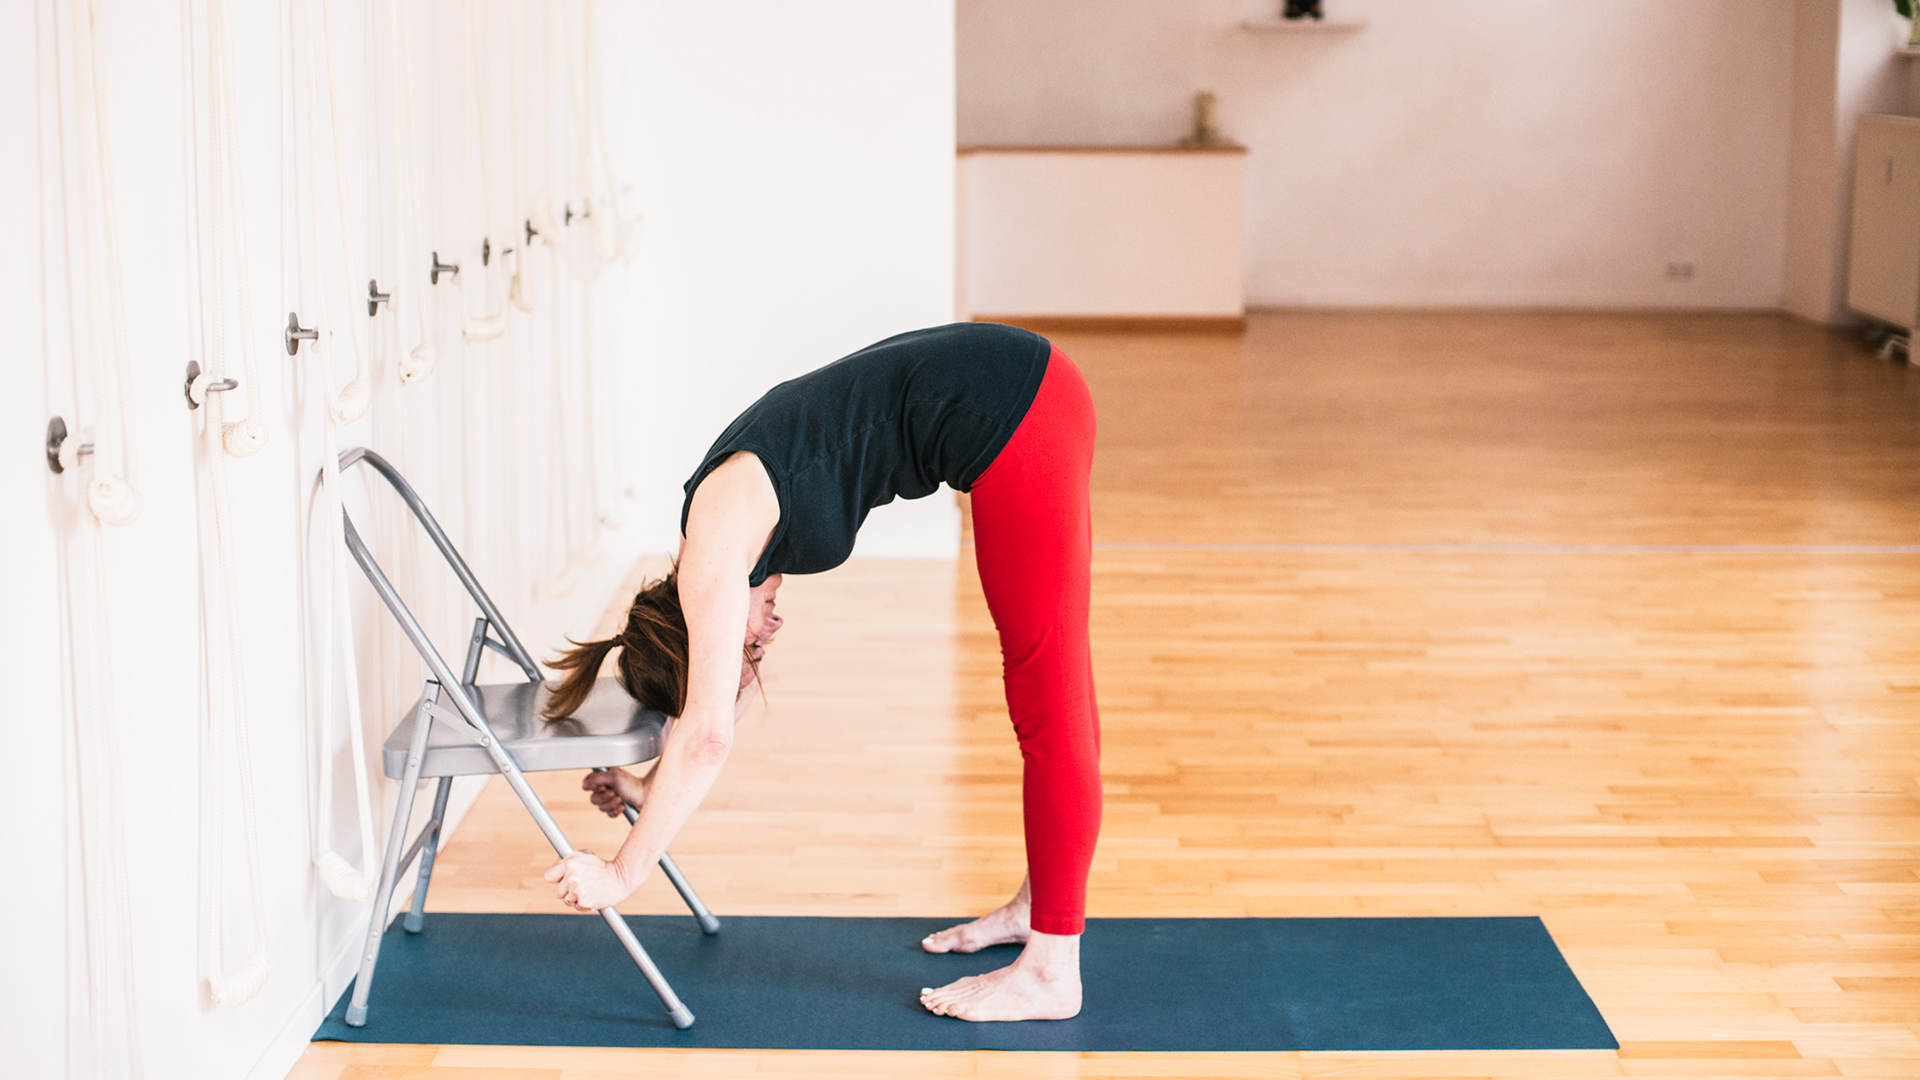 Iyengar Yoga General Level Sequence - Standing forward bend - Uttanasana with hands on yoga chair